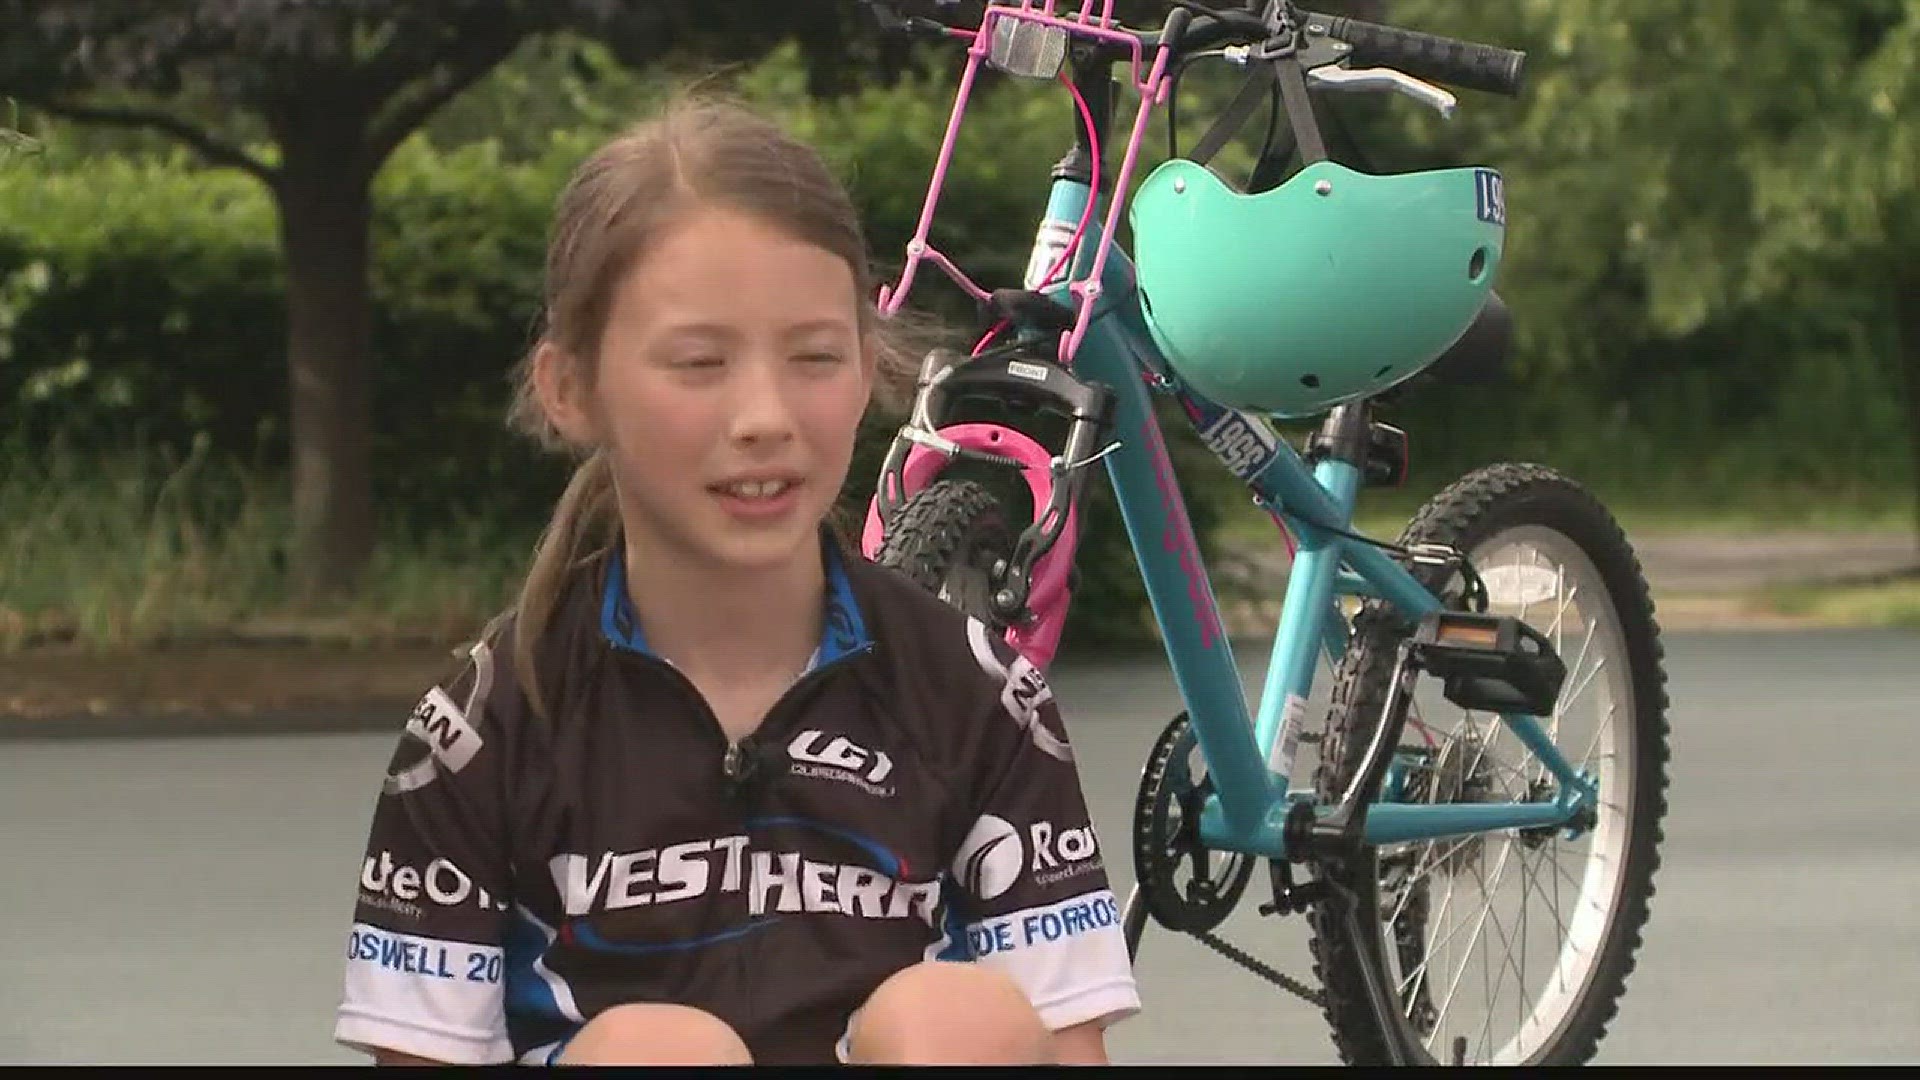 The more than 7,000 participants in the Ride for Roswell come in all ages and skill levels, and among them is 9-year-old Sydney Dobmeier of Orchard Park who has raised more than $12,000.